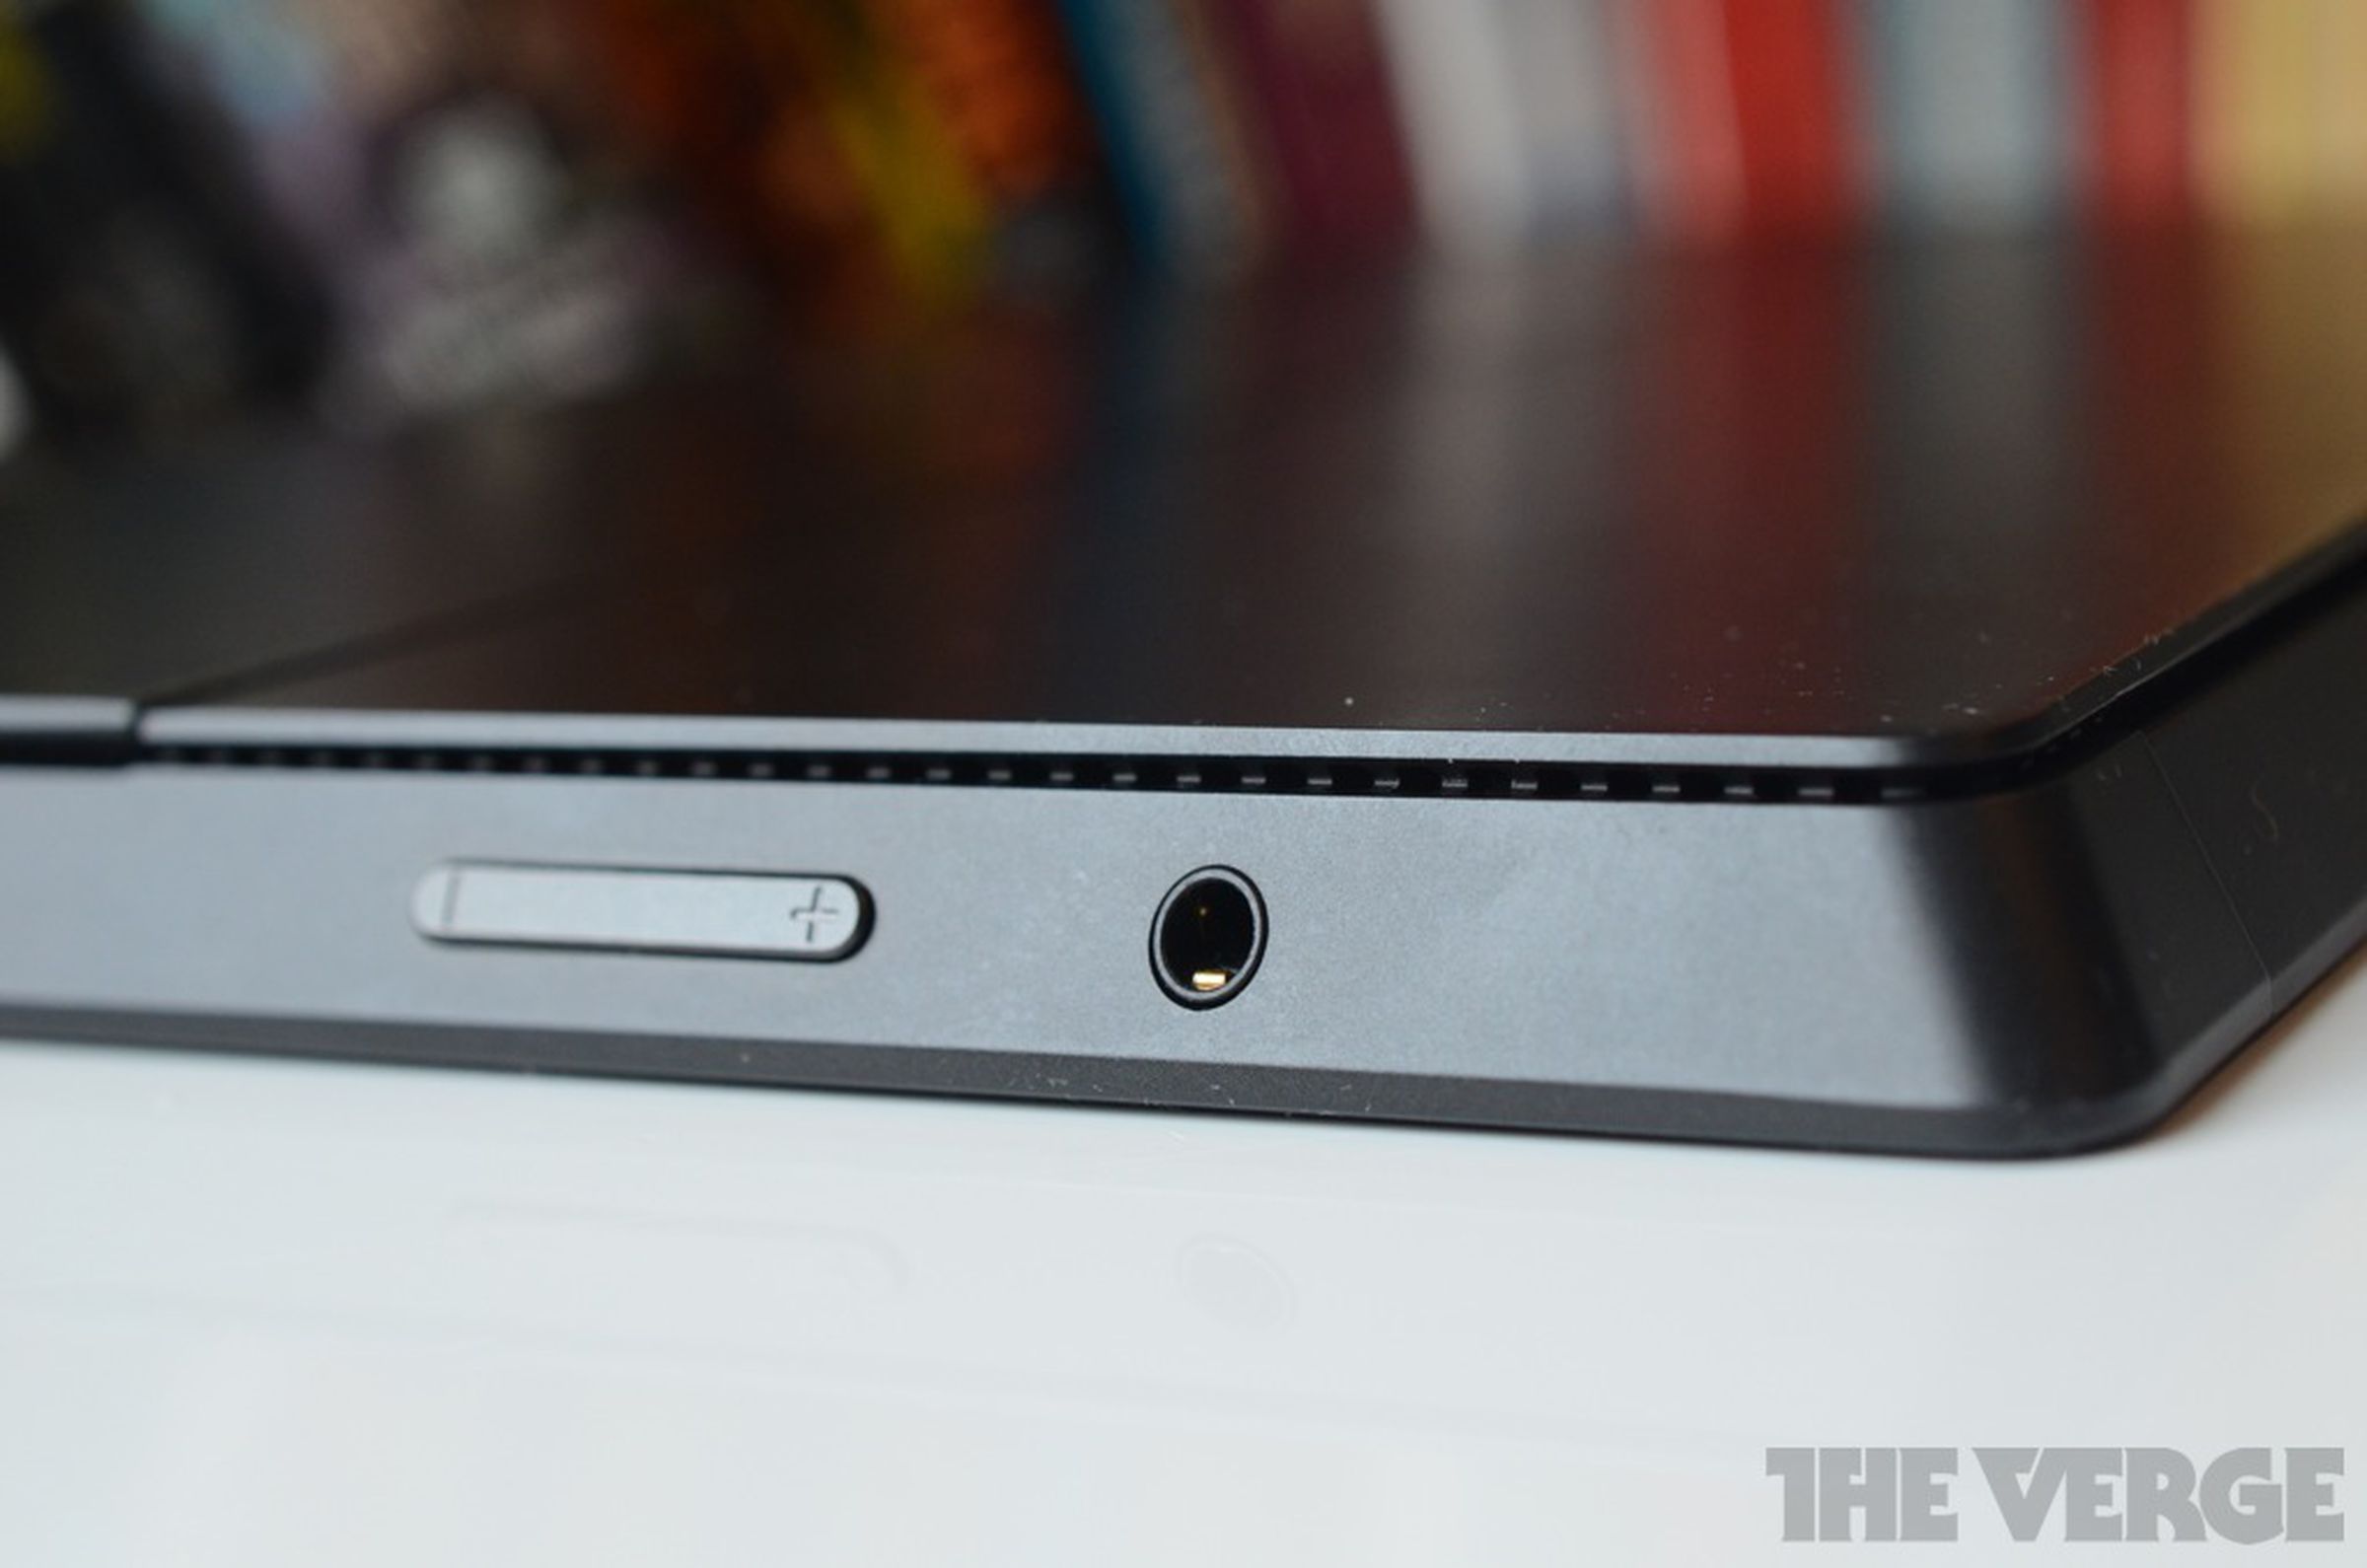 Microsoft Surface Pro hands-on pictures